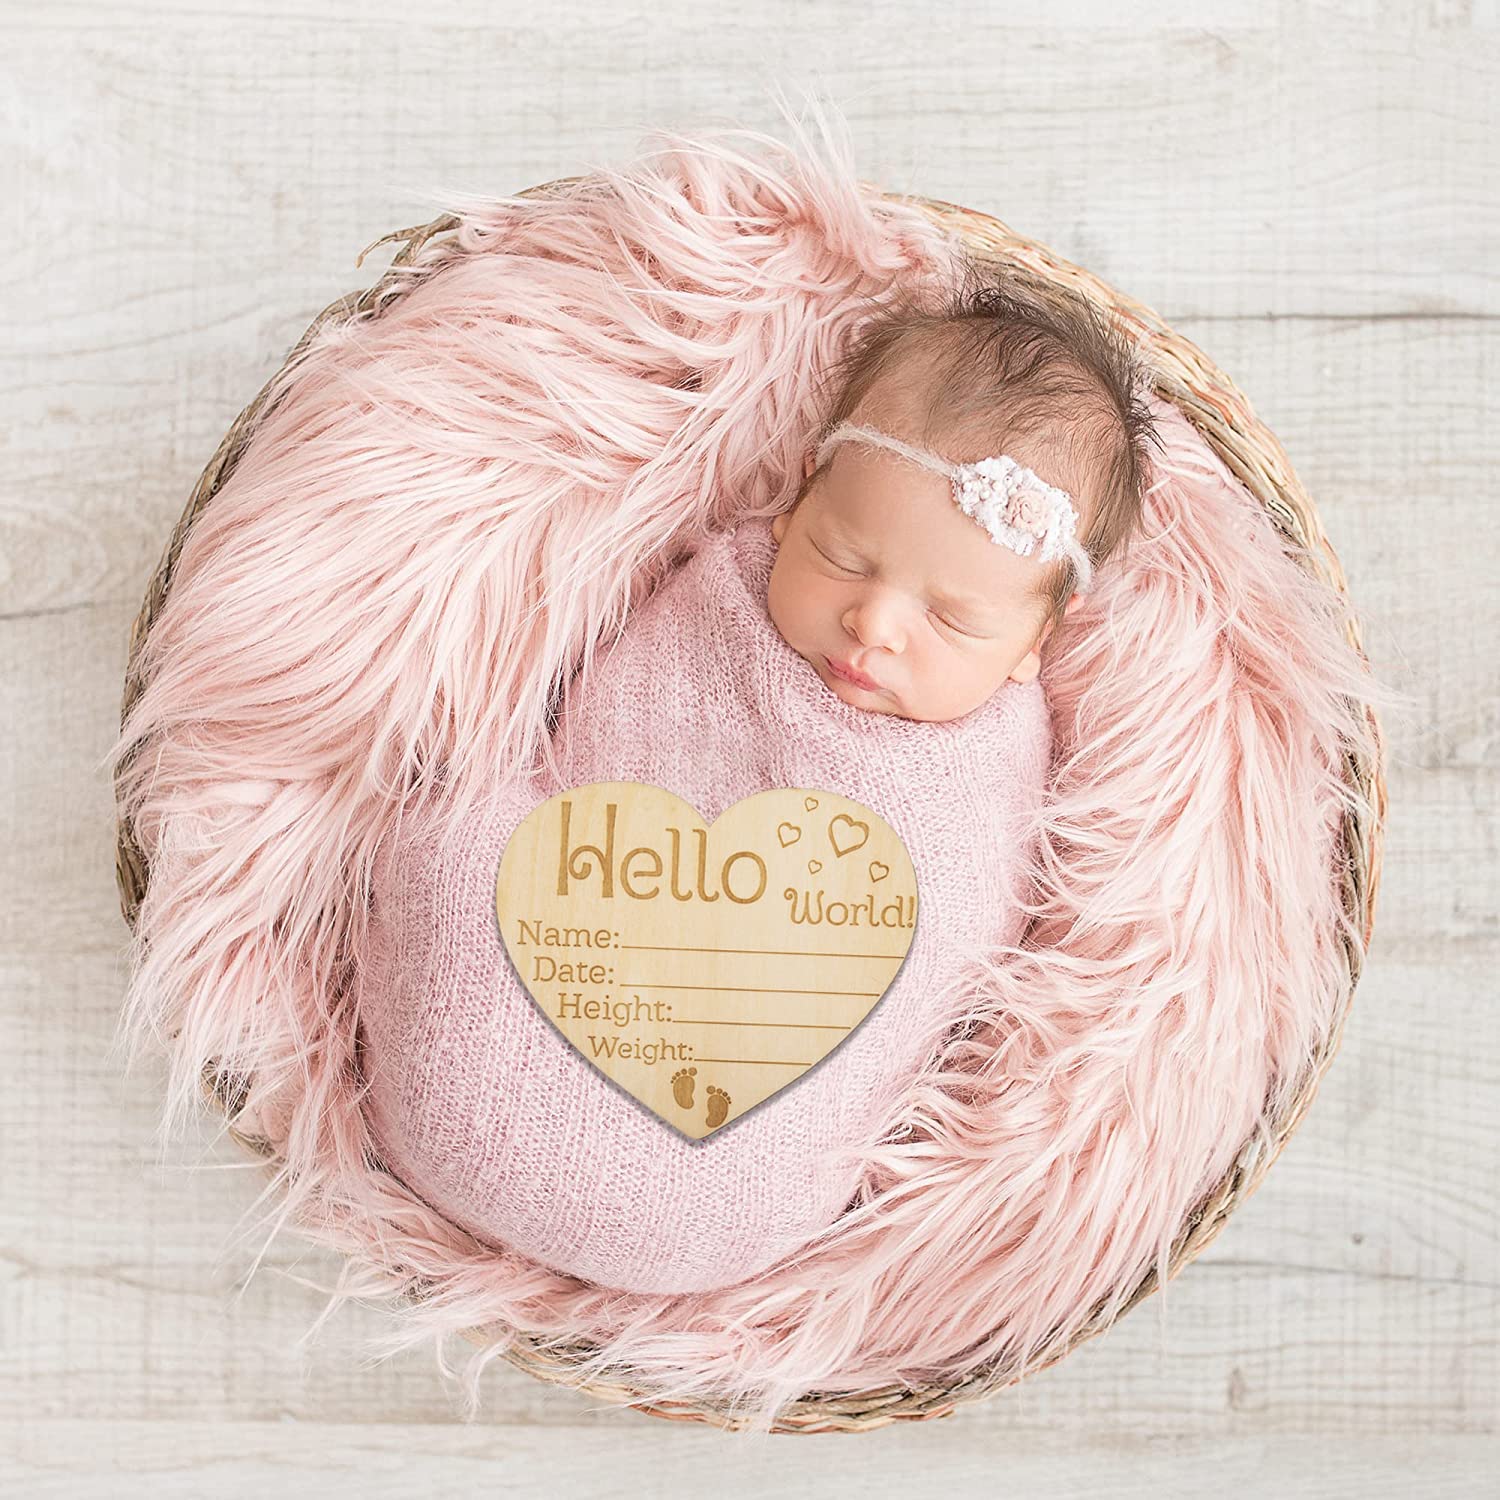 lustrioustoy Wooden Baby Announcement Sign, Birth Announcement Sign, Hello World Newborn Sign, Baby Name Announcement Sign for Photo Prop Baby Shower Nursery Gift（Round） (heart-shaped)